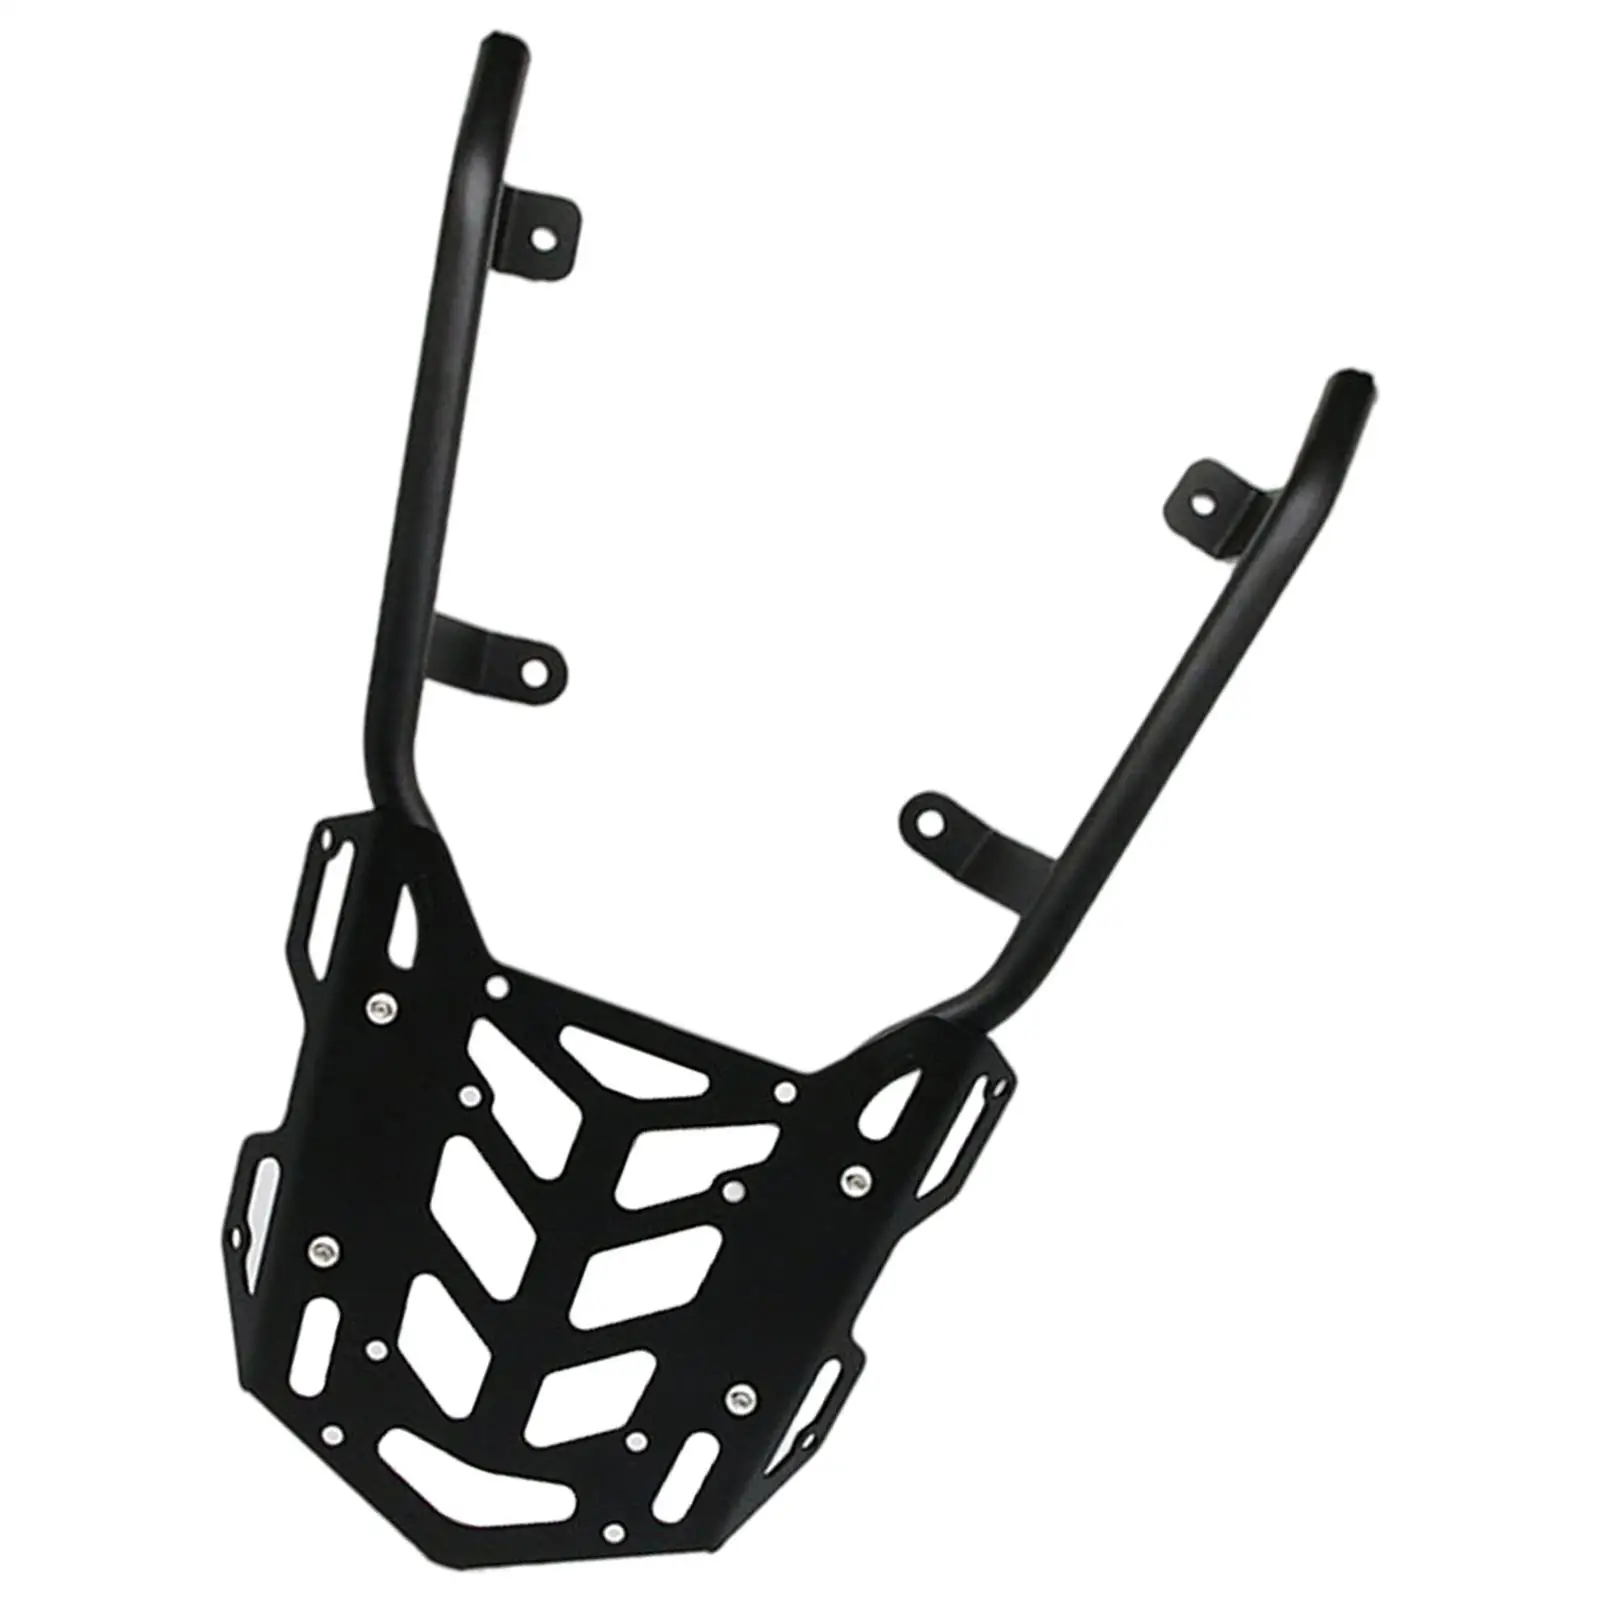 Motorcycle Rear  Base, Tail Rack, Support Carrier Shelf, Bracket   for  150 1, Parts ,Accessories 